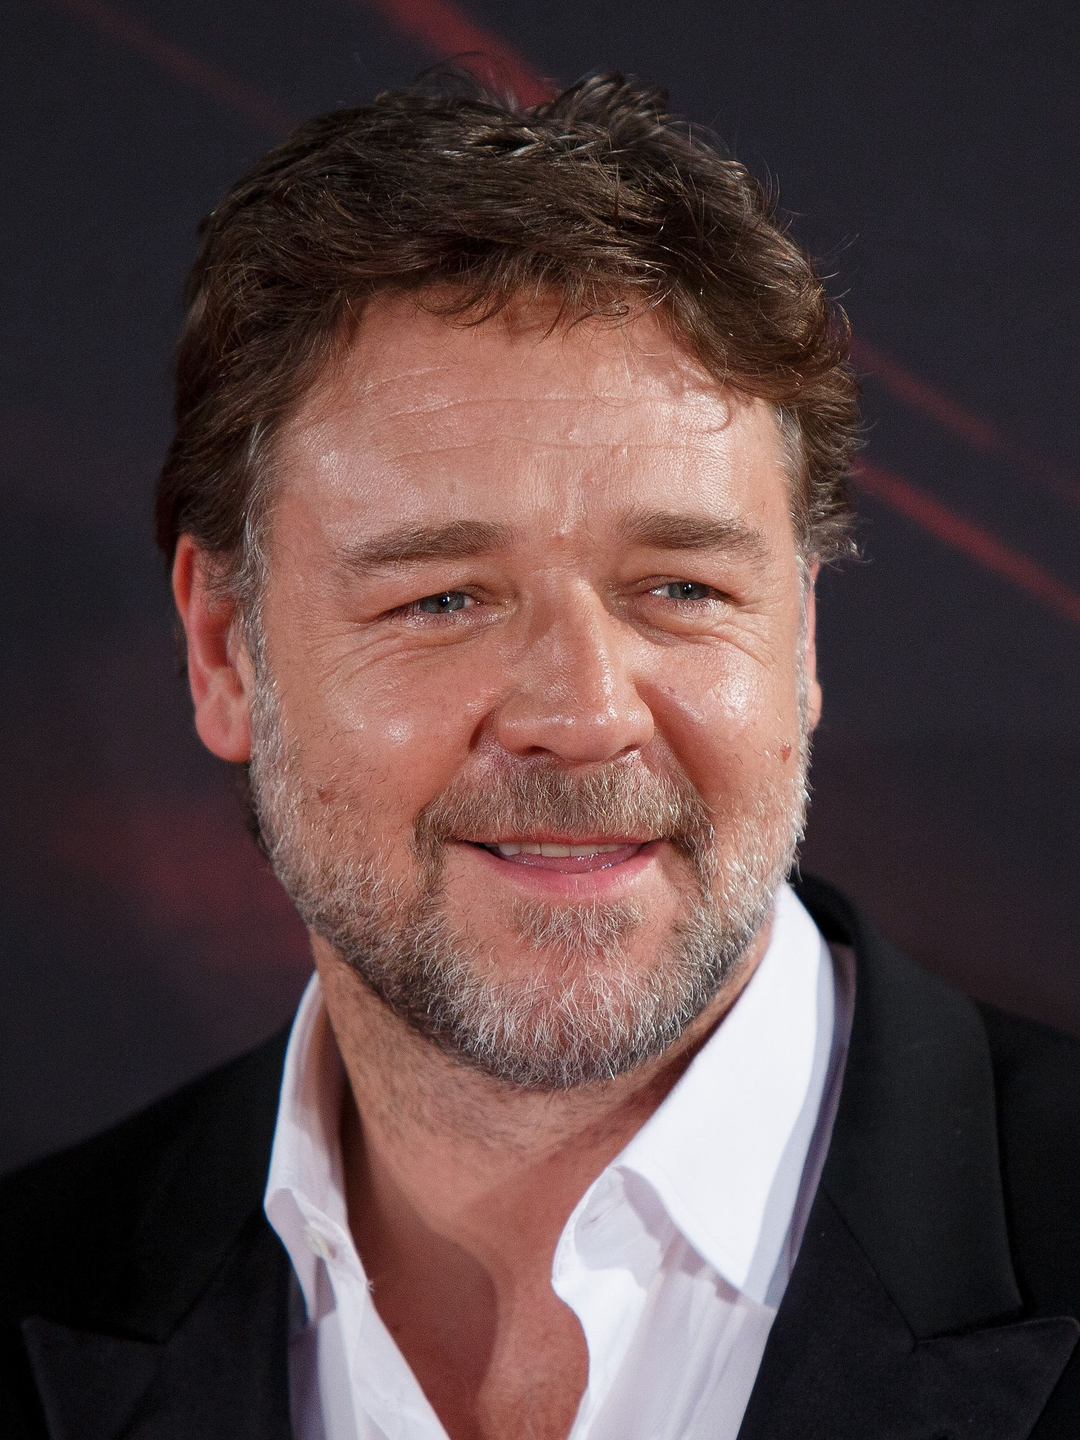 Russell Crowe life story